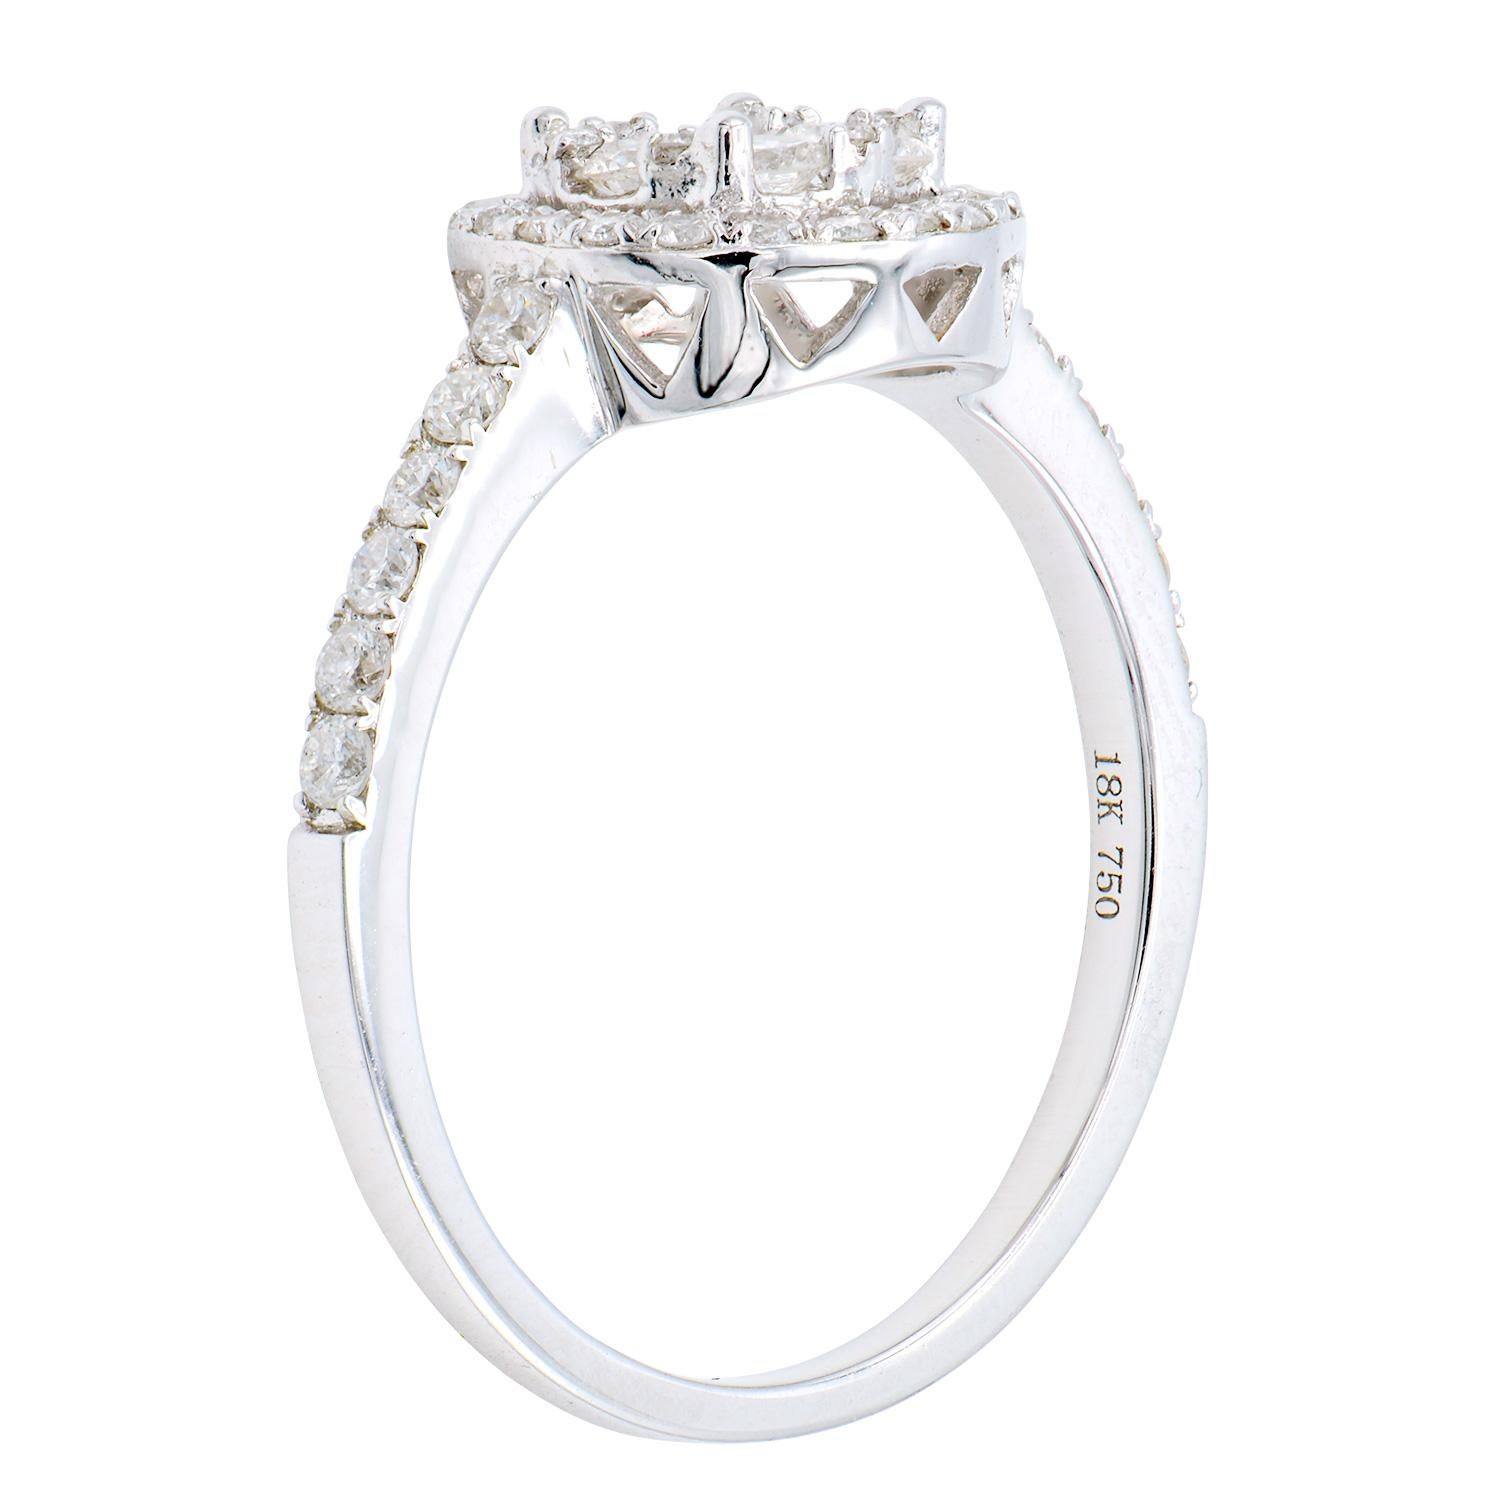 Illusion rings create a beautiful round diamond look without having to buy one big diamond. This ring is made of 45 round VS2, G color diamonds that are expertly assembled to create the look of one big round diamond. It is then finished with a